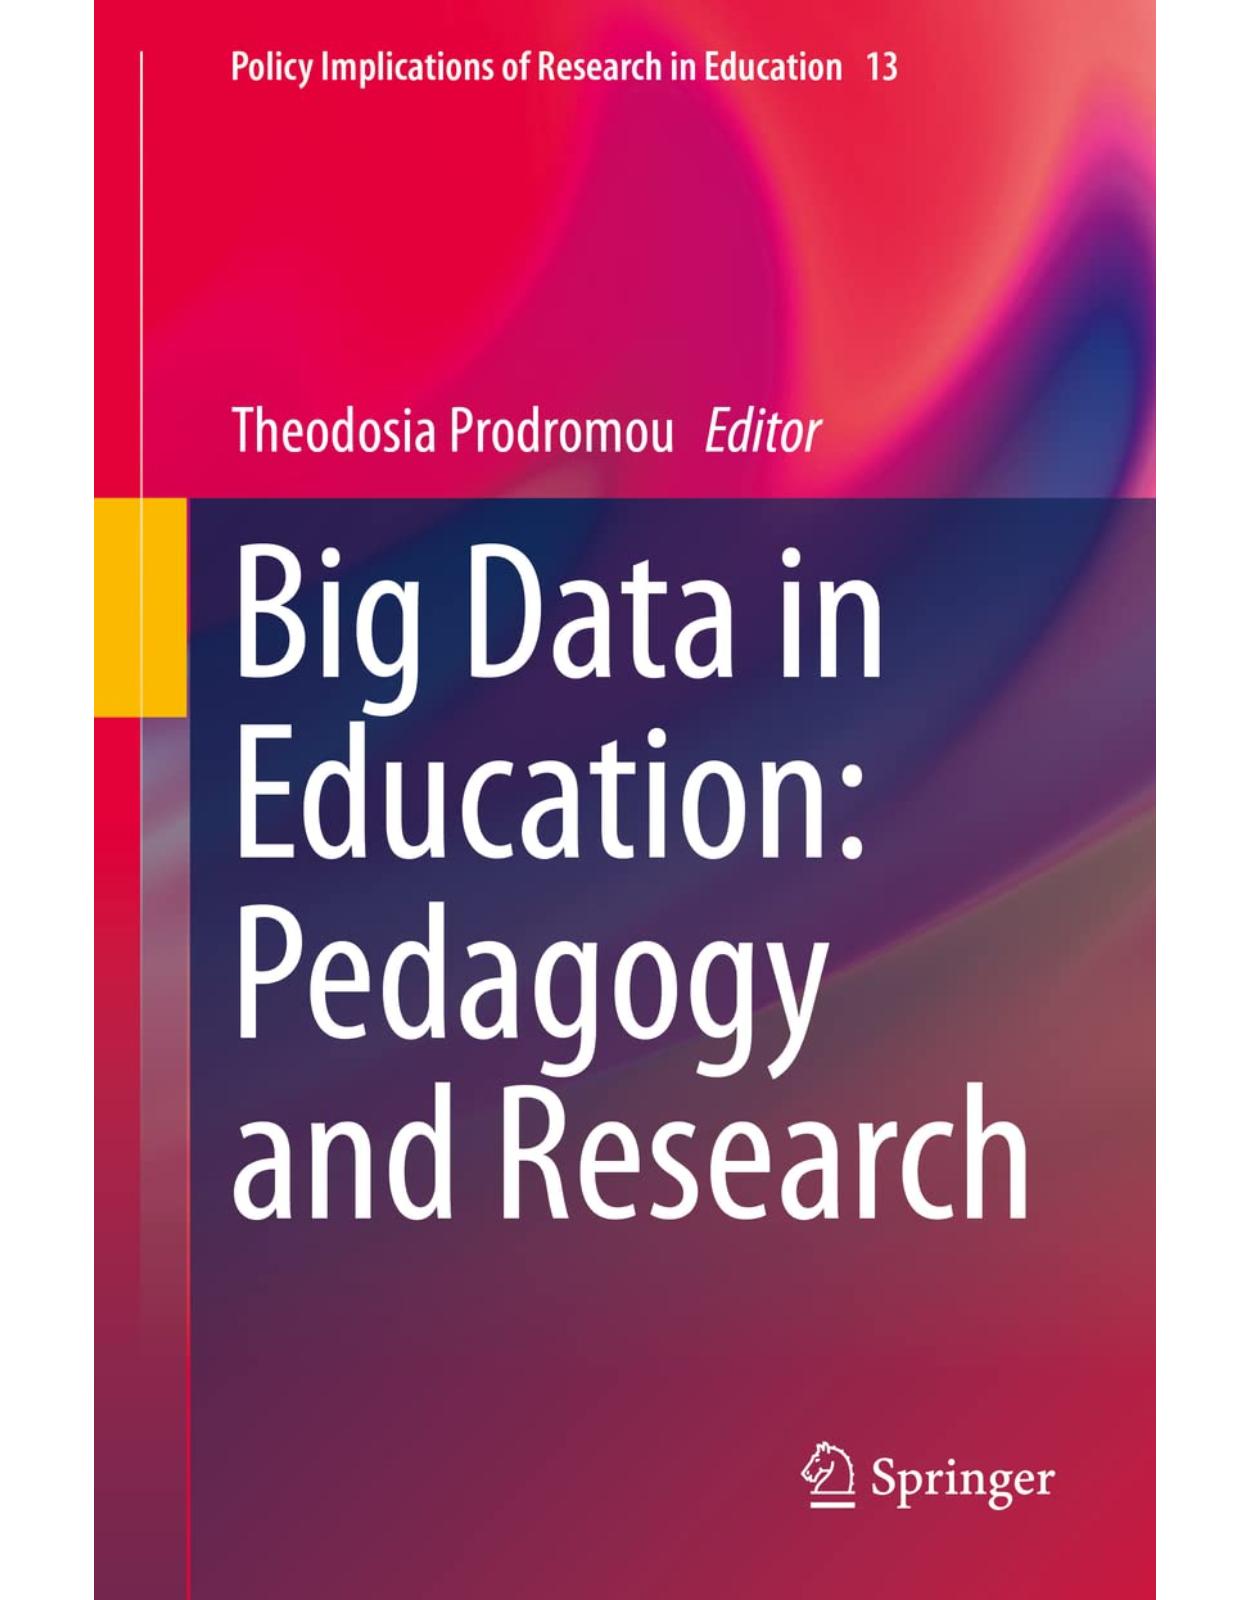 Big Data in Education: Pedagogy and Research: 13 (Policy Implications of Research in Education